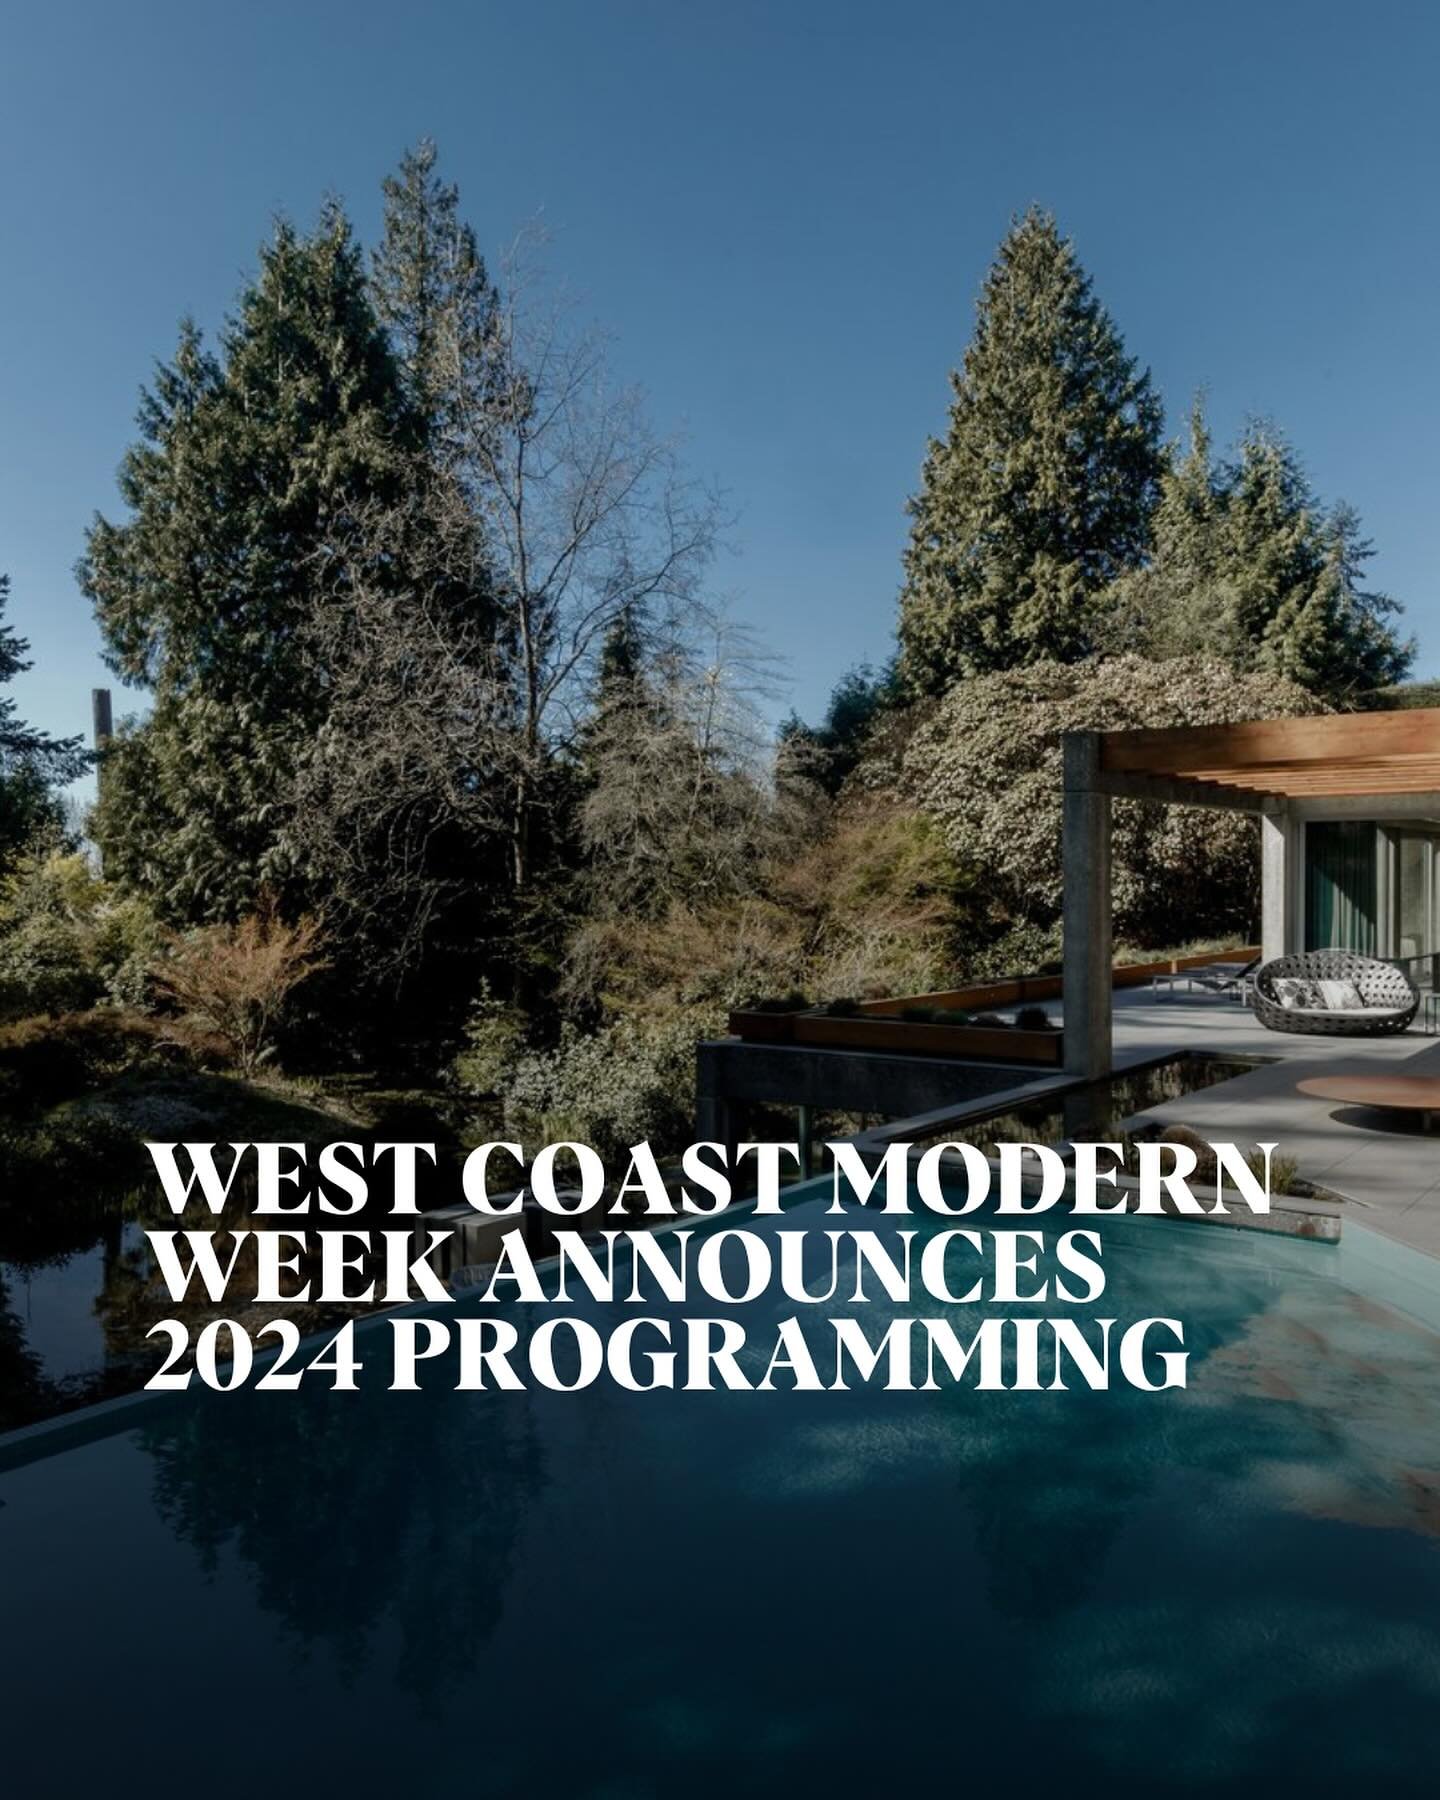 Celebration of West Coast Modern architecture and design runs July 9 to 14 and features walking tours, exhibitions, a documentary screening, and more. 

Head to Stir to read more about West Coast Modern Week. 

#yvrbc #westvancouver #westvan #westvan